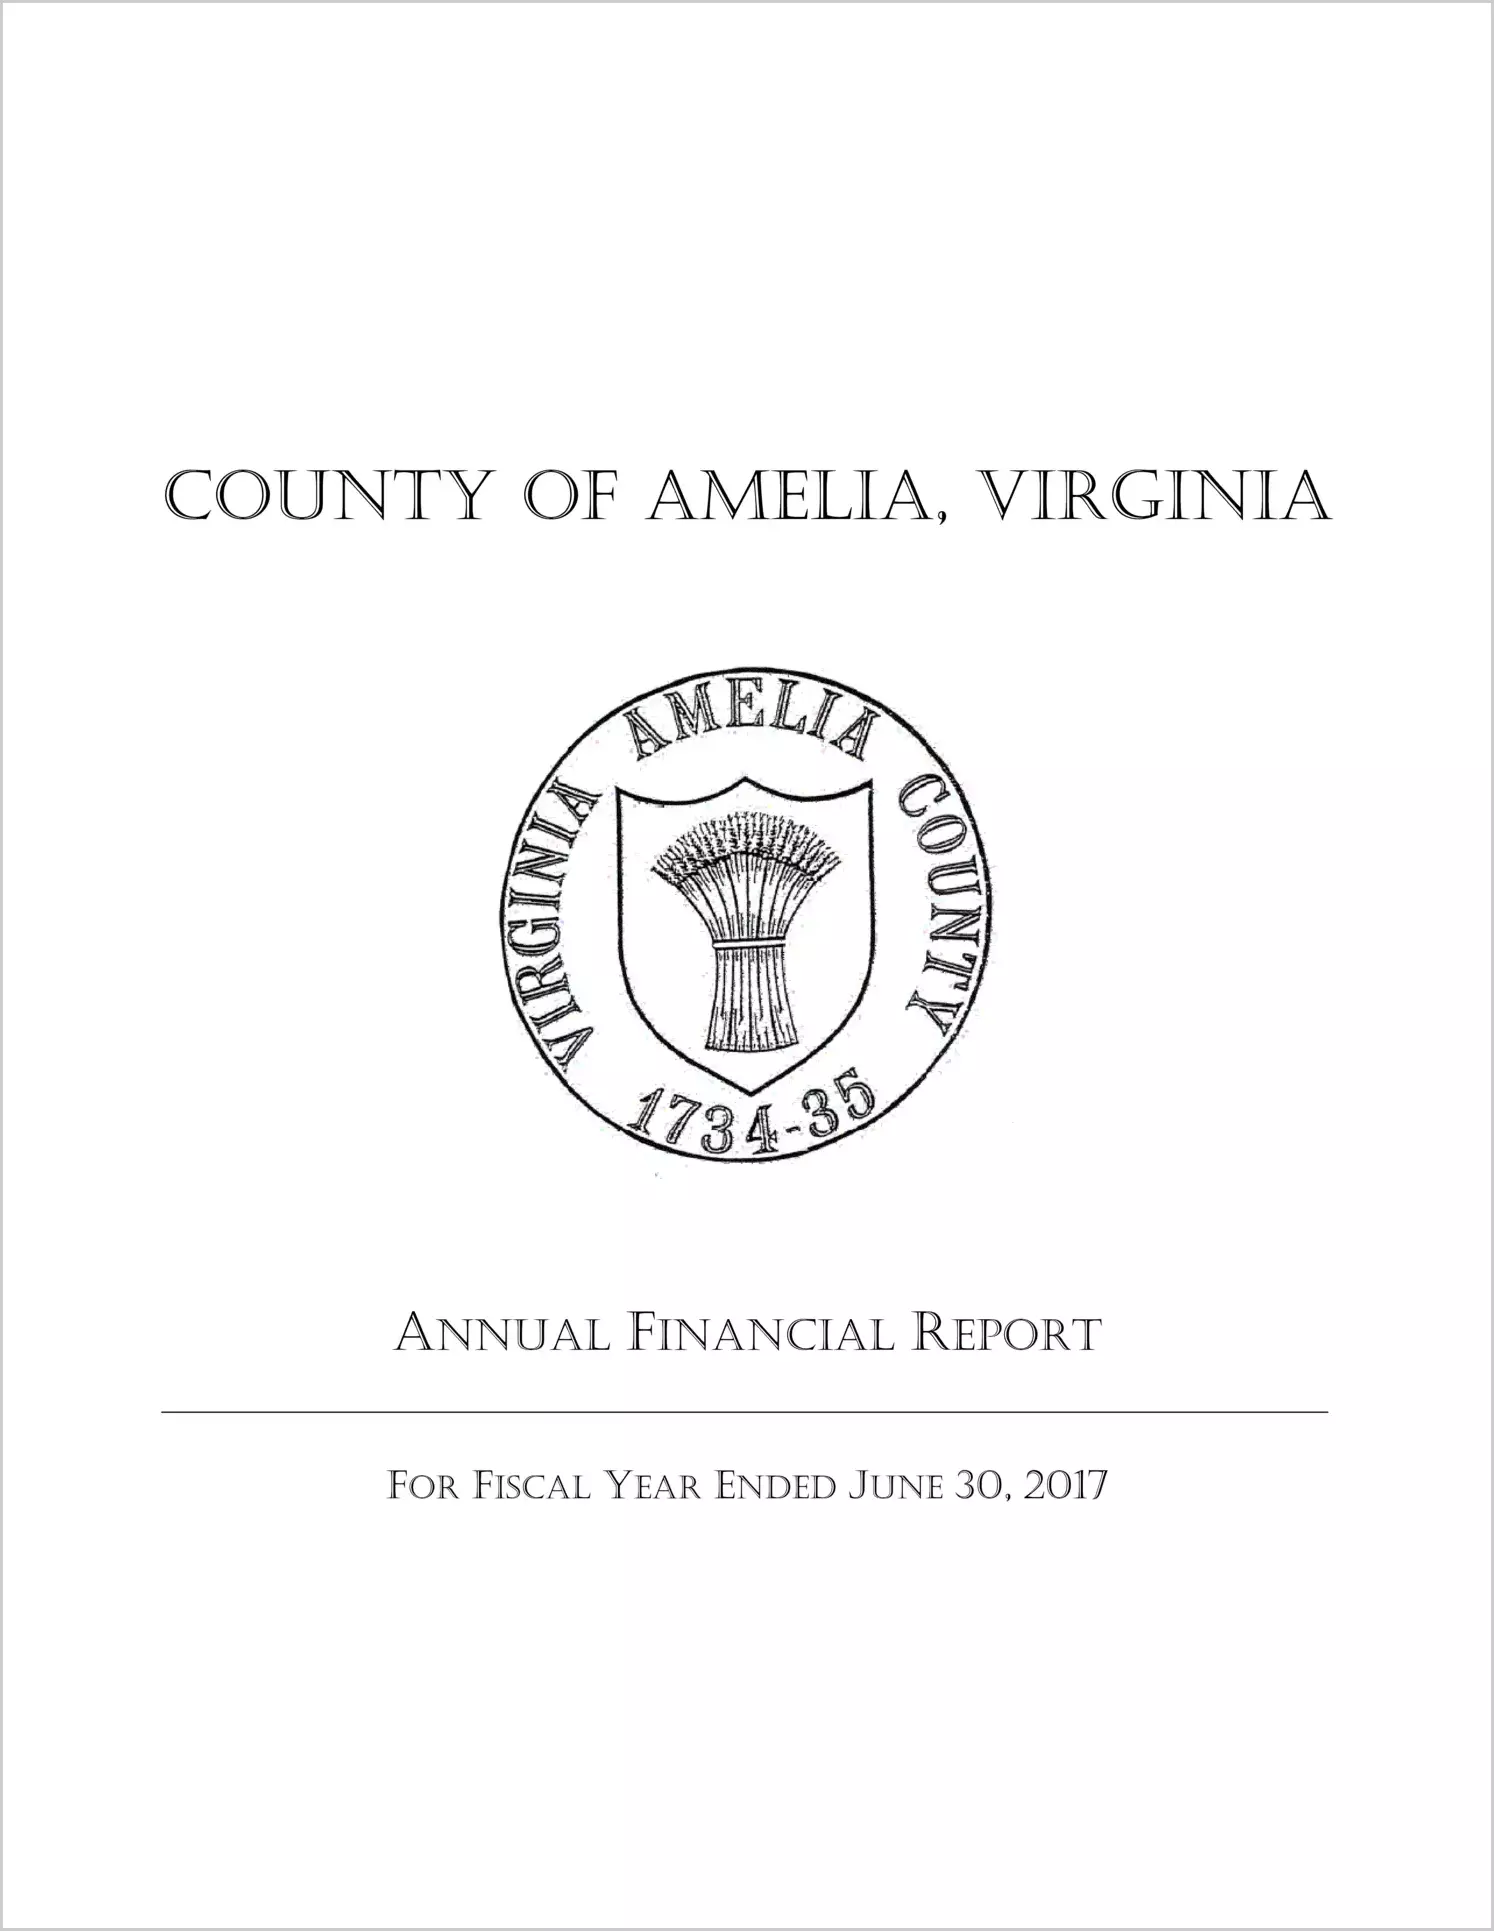 2017 Annual Financial Report for County of Amelia